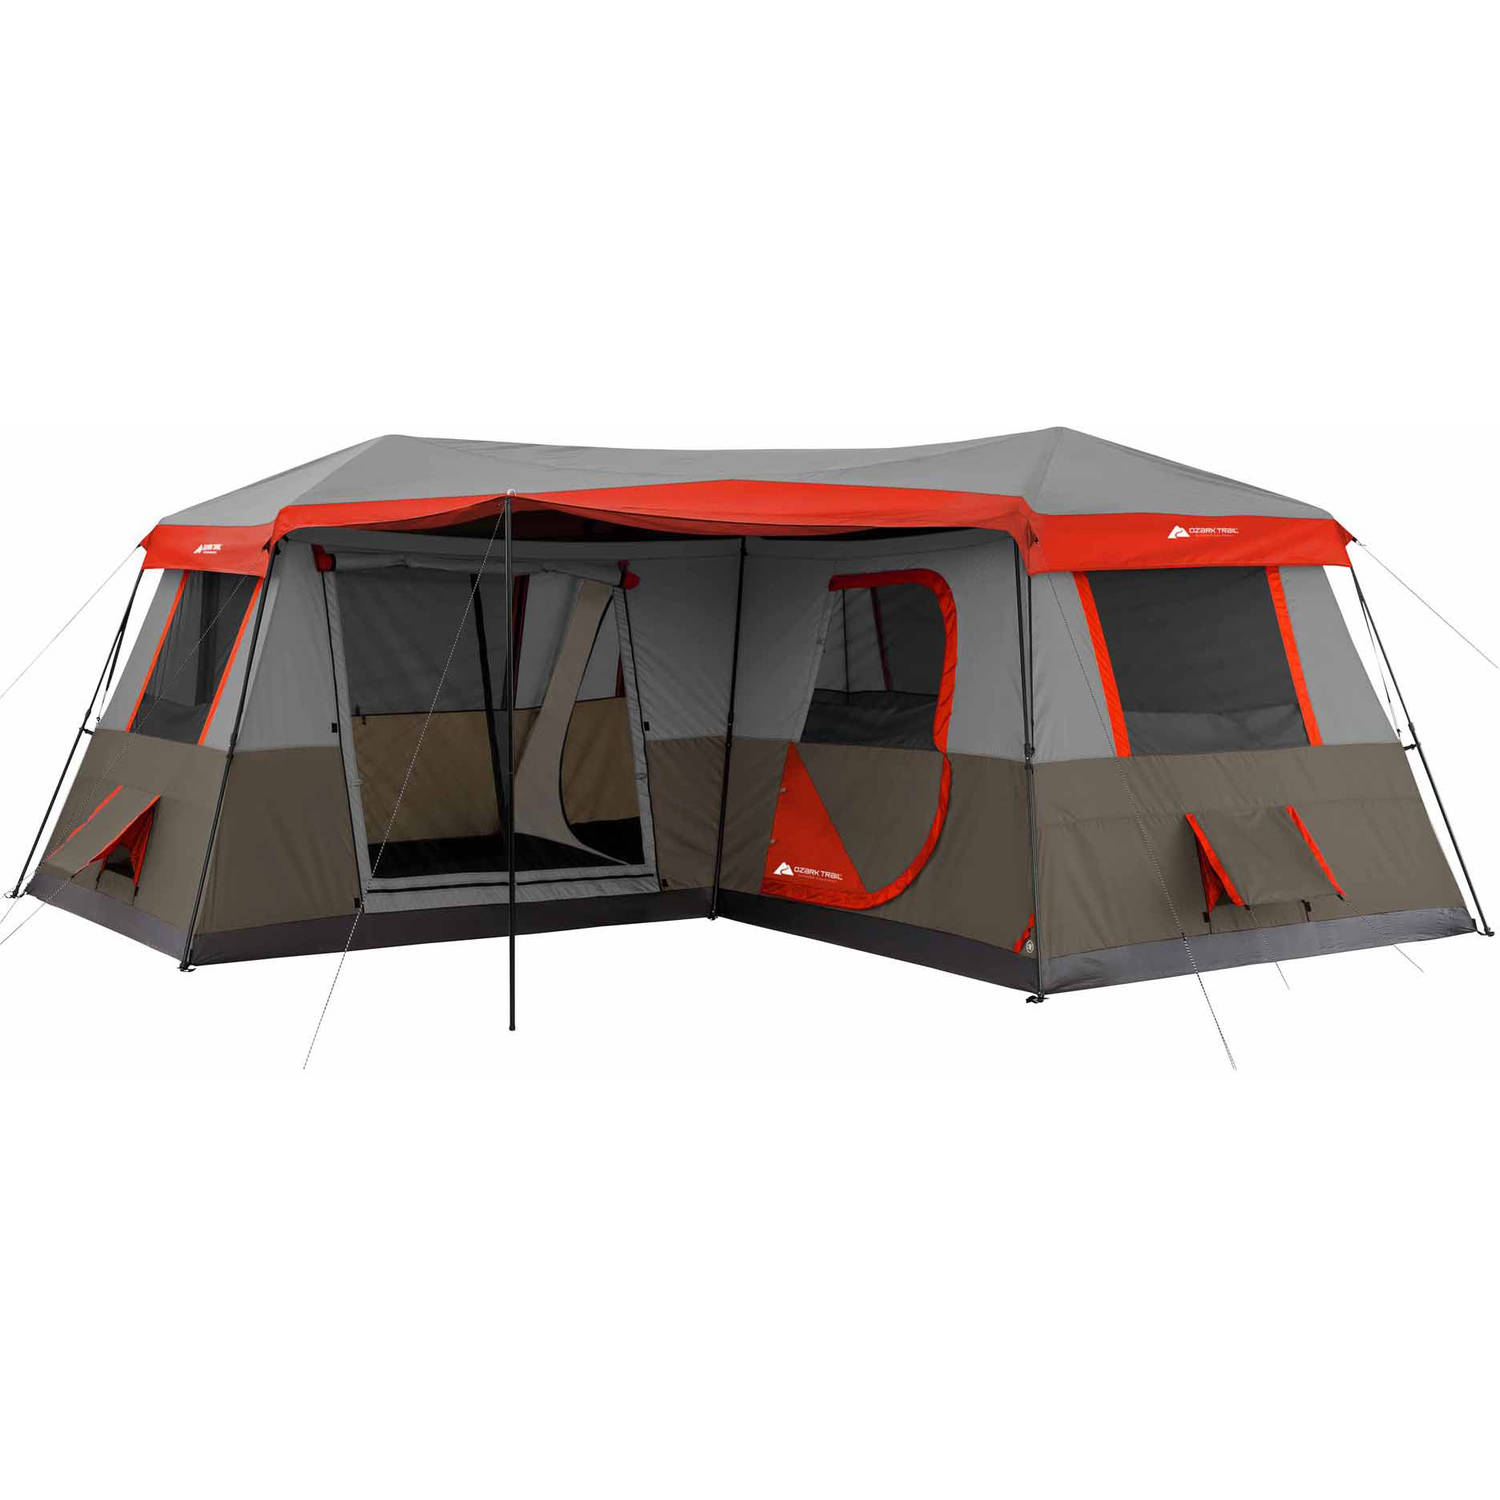 Ozark Trail 16' x 16' Instant Cabin Tent, Sleeps 12, 55.2 lbs - image 1 of 10